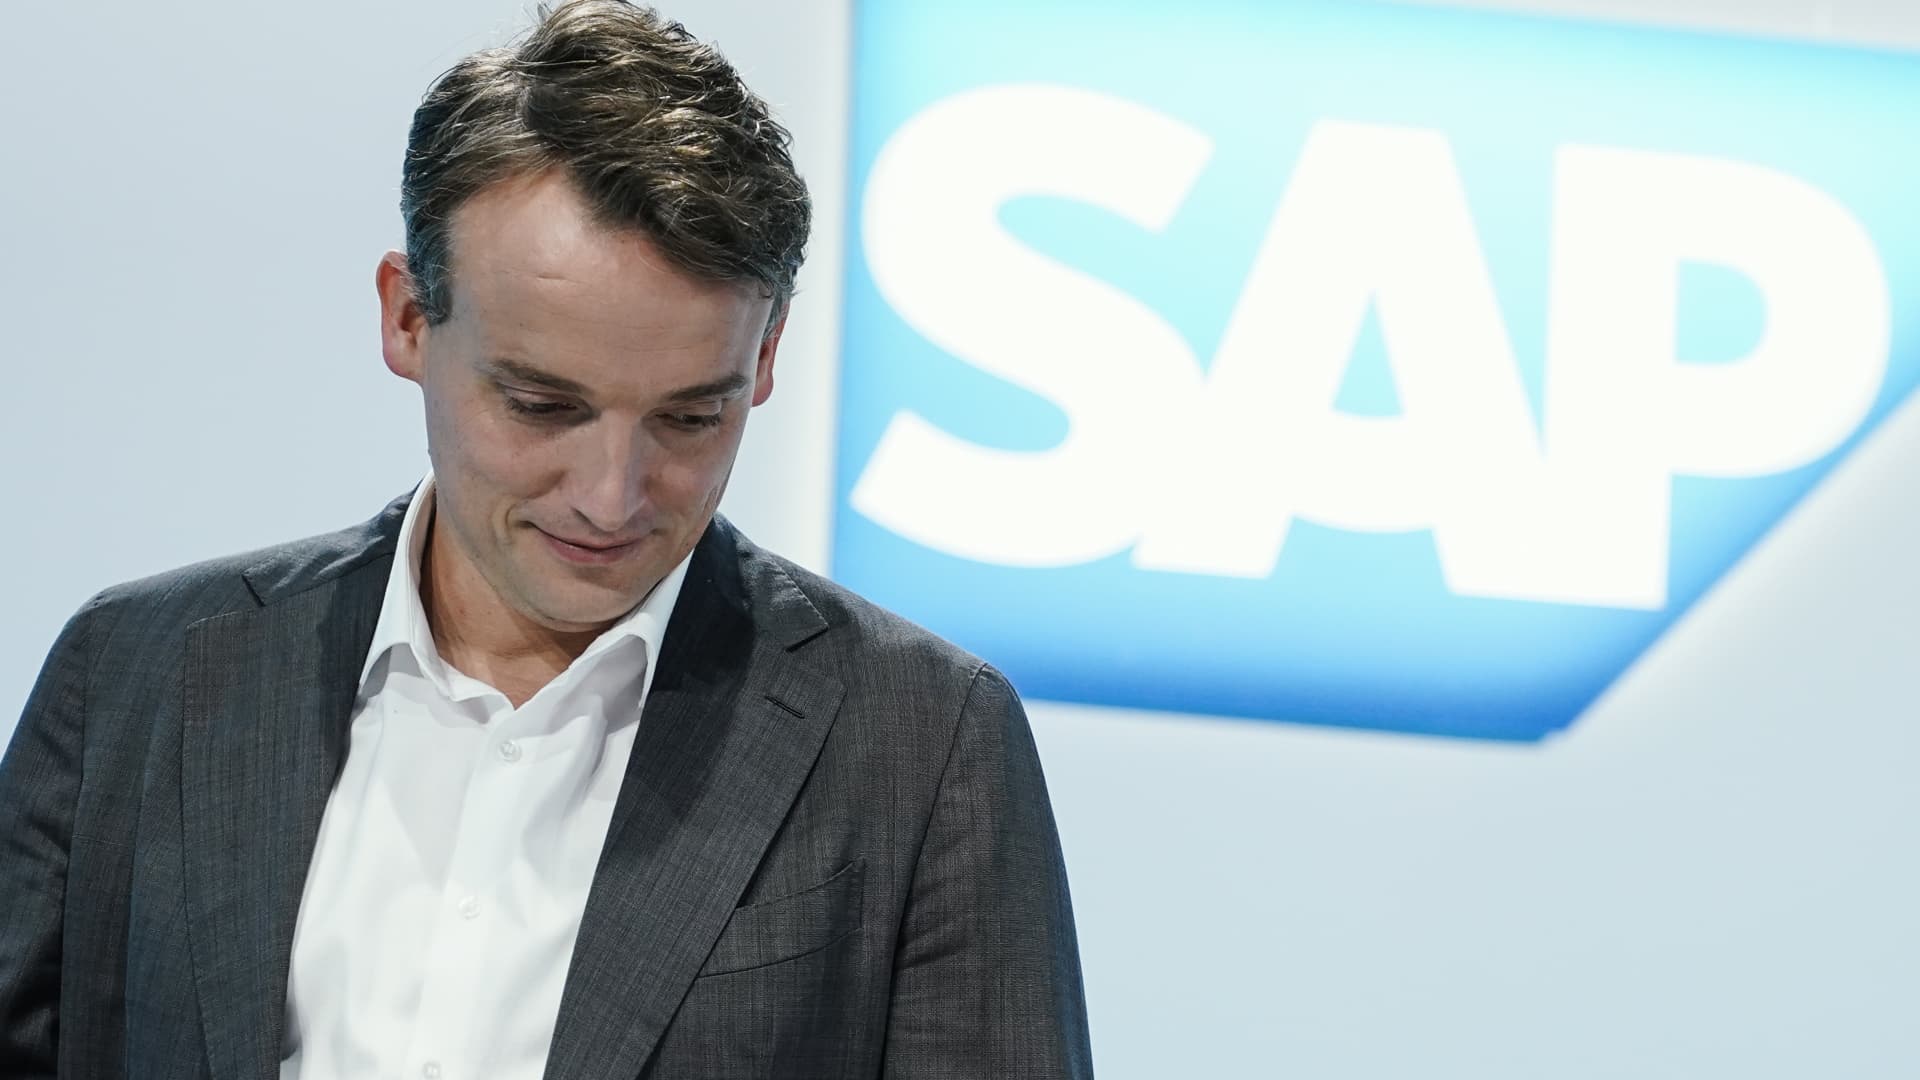 SAP plans job changes or buyouts for 8,000 staff in restructuring belief